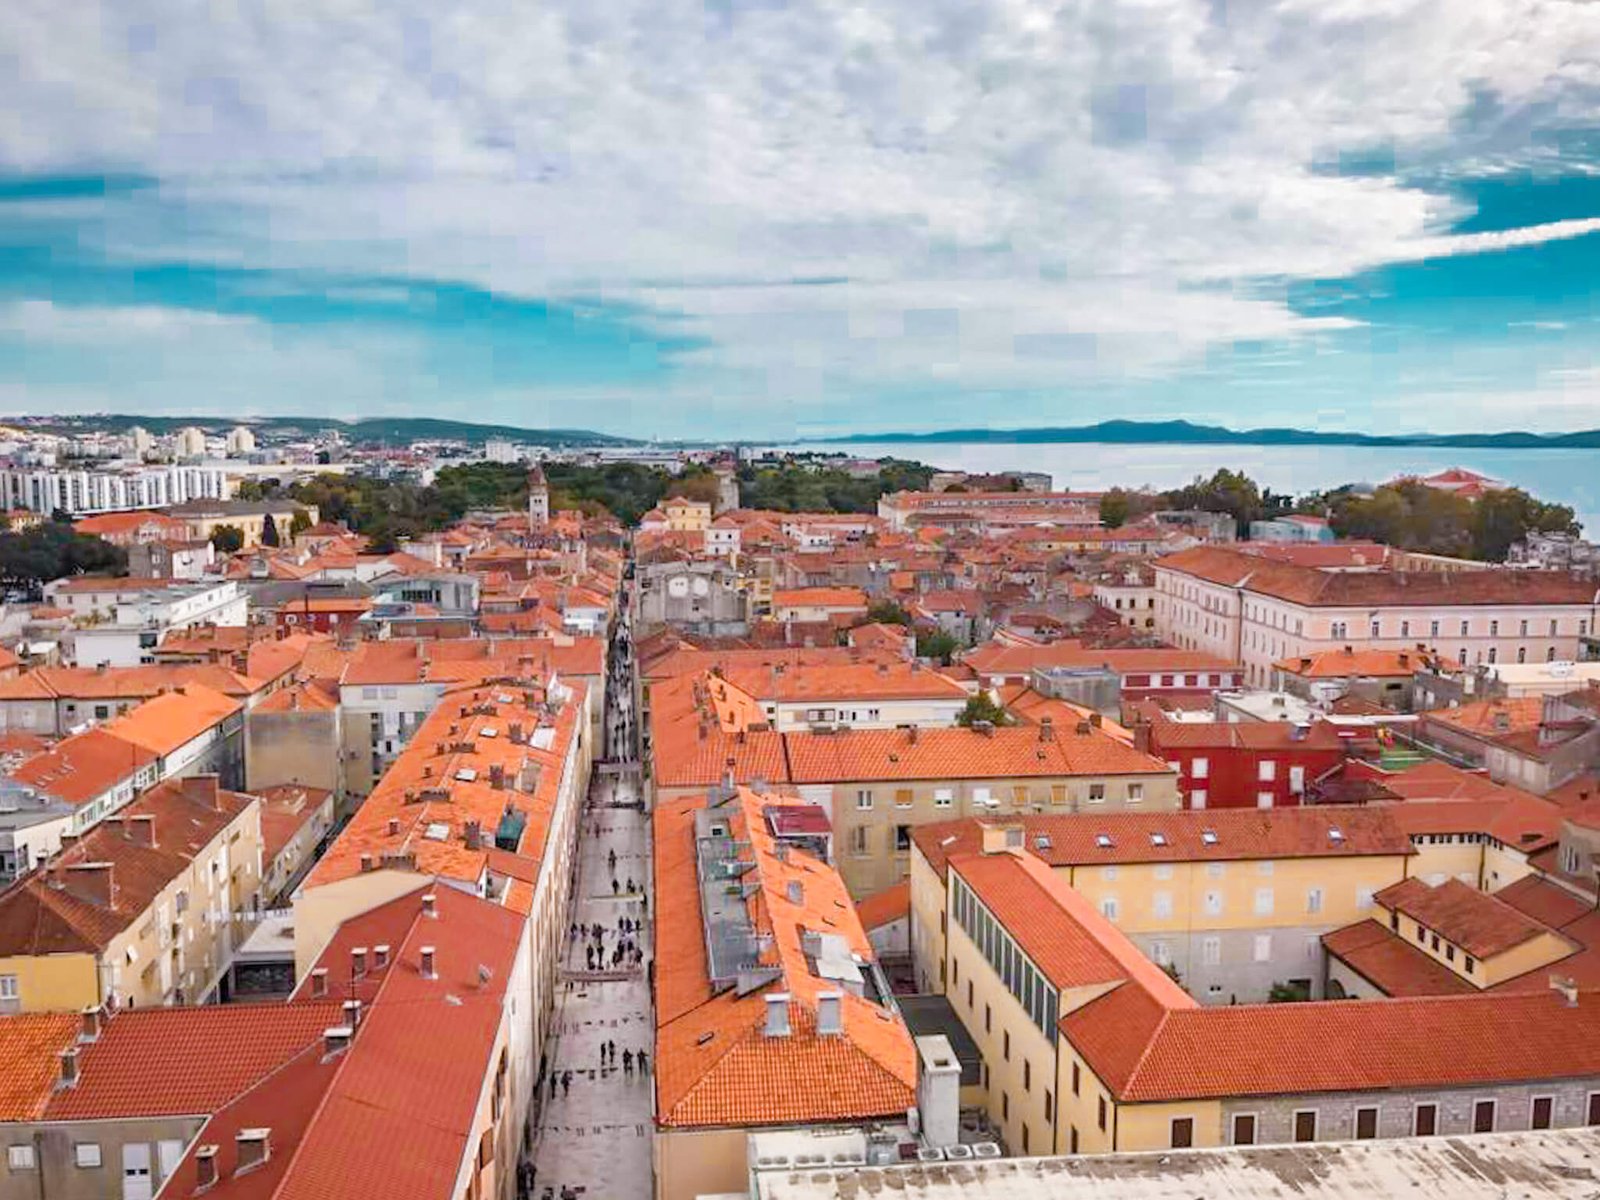 Is it worth visiting Zadar Croatia? Things to do